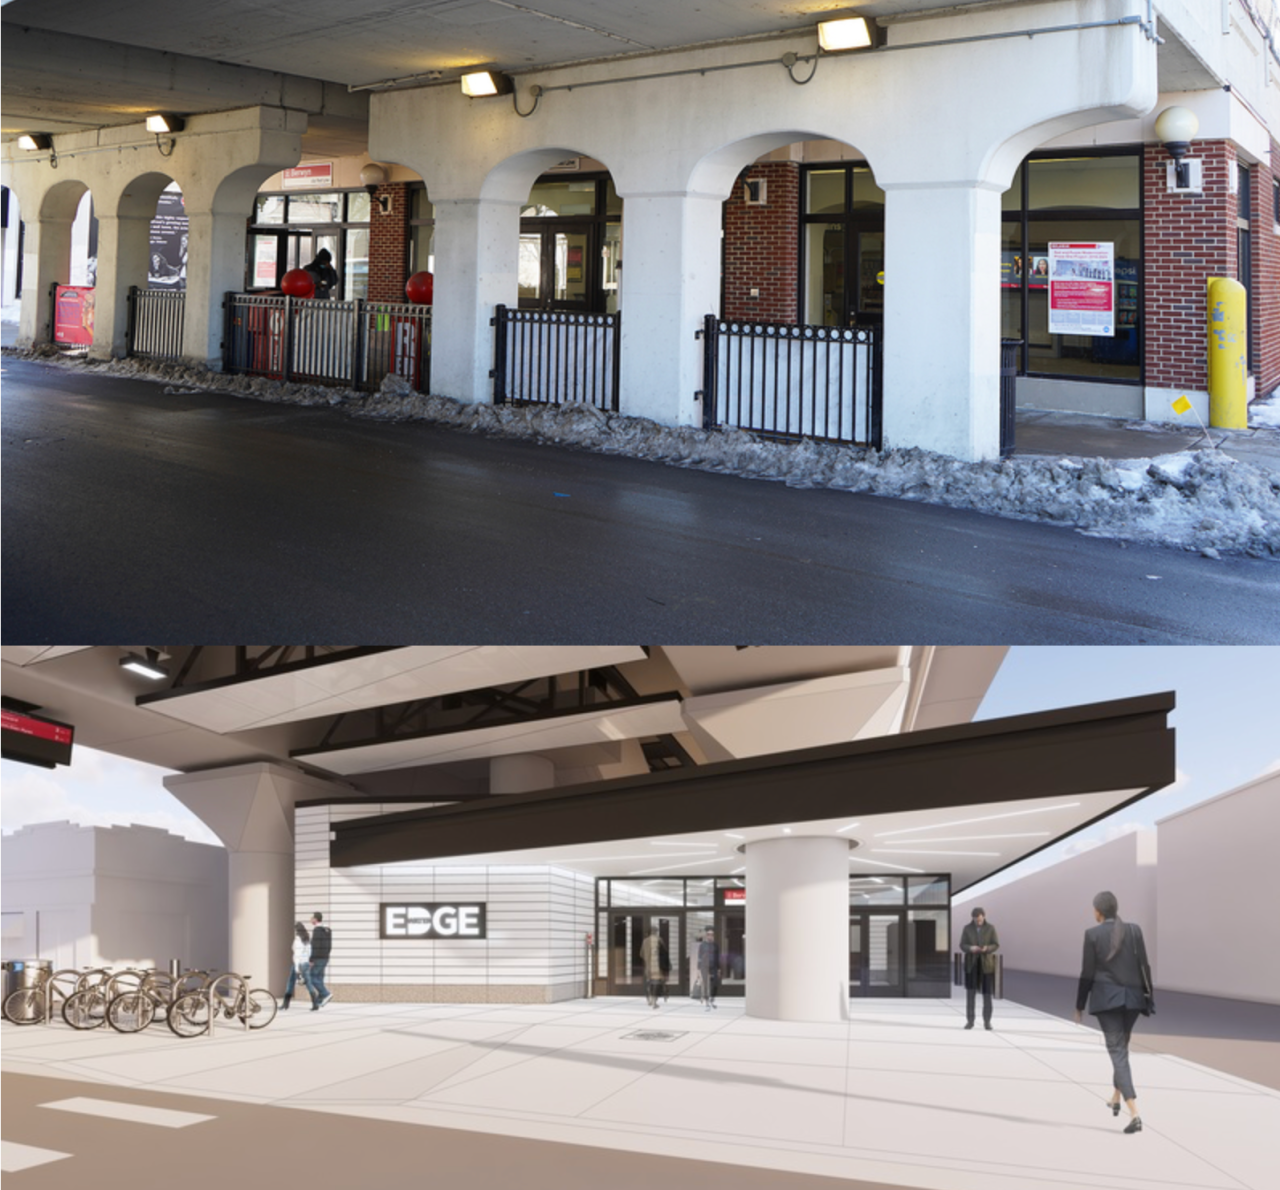 The Bryn Mawr station before and after recreation. Images: CTA